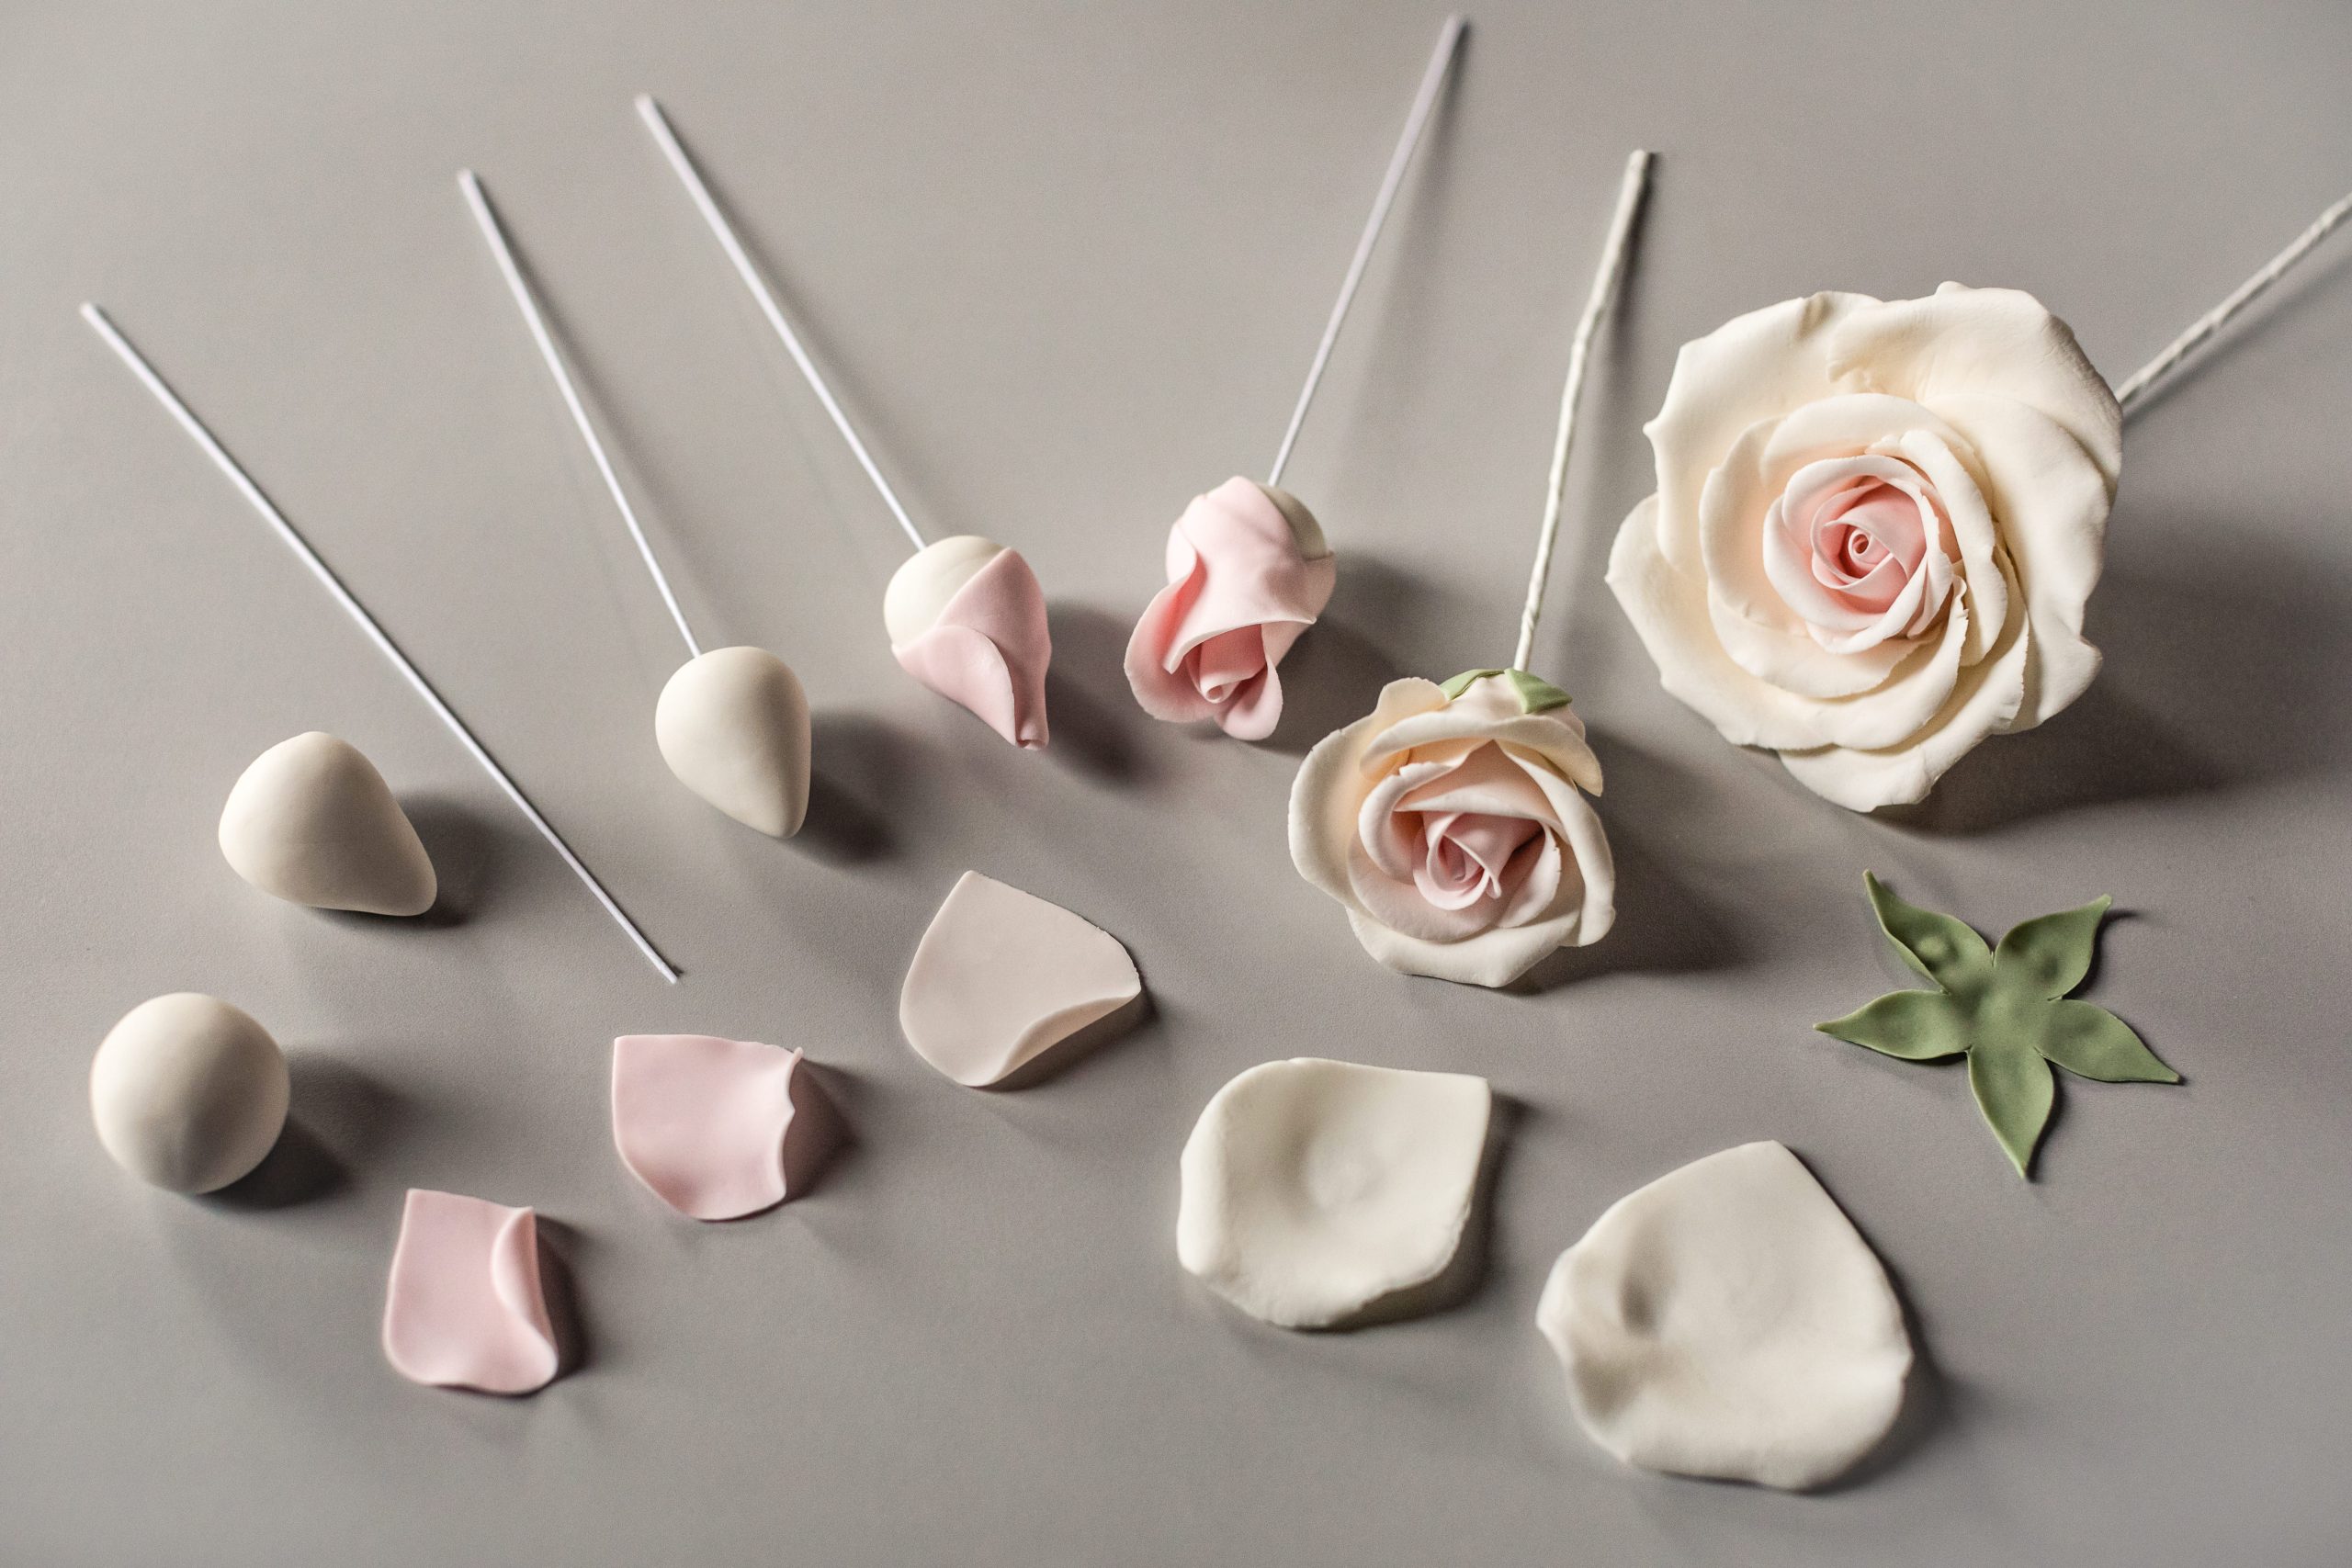 The process of creating delicate & beautiful sugar roses. By Renown Cake Designer Ana Parzych